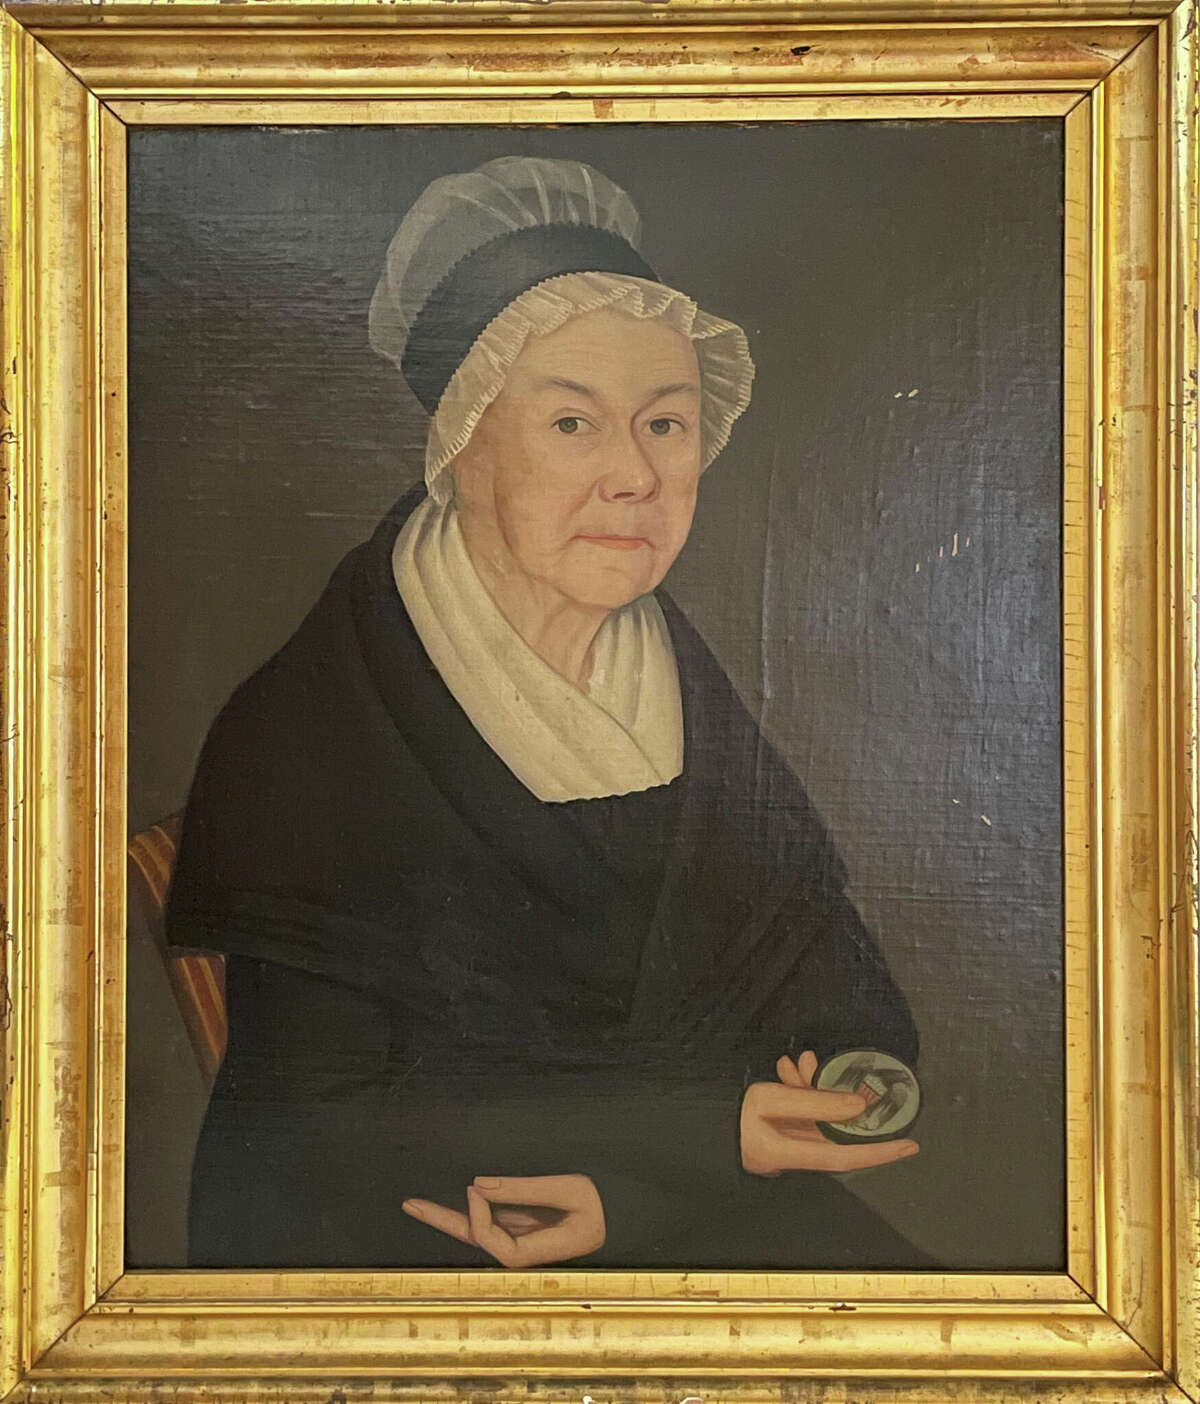 Portrait of Annatje Eltinge (1748-1827) done by Ammi Phillips in the 1820s. The painting was stolen from the Historic Huguenot Street building in New Paltz in 1972 and recovered 50 years later. 